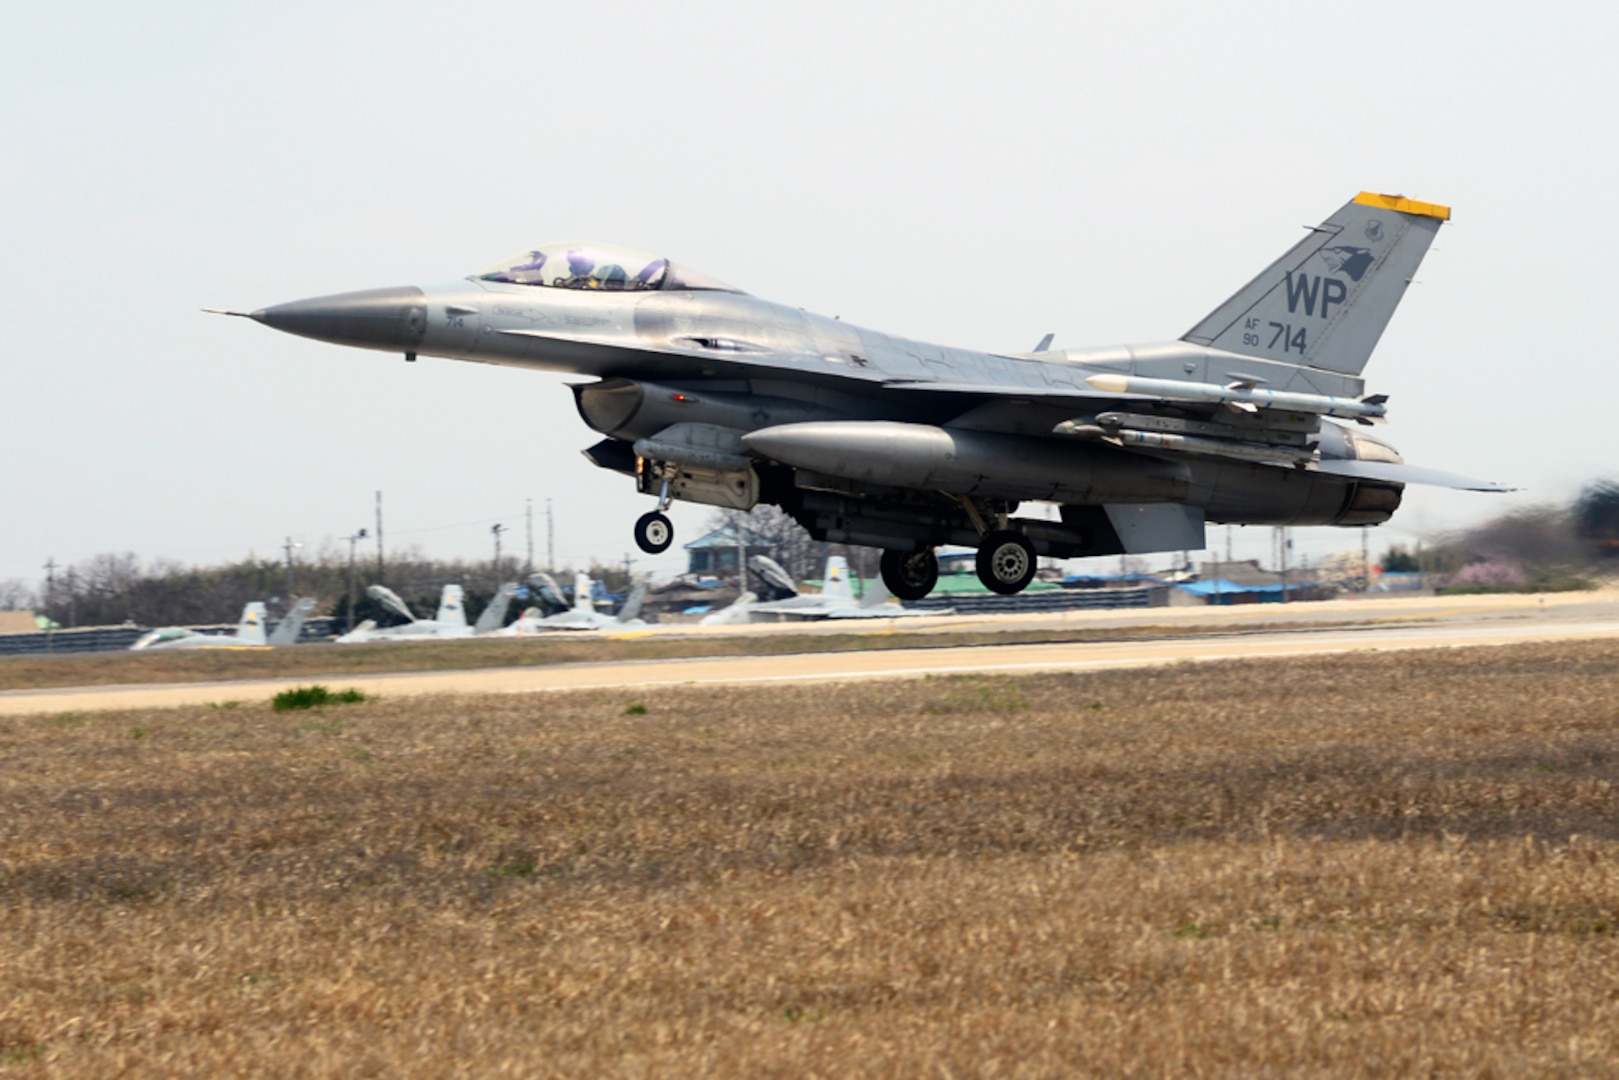 GWANGJU AIR BASE, Republic of Korea  (Apr. 10, 2015) - An F-16 Fighting Falcon takes off to participate in Exercise Max Thunder 15-1. The Wolf Pack joined other U.S. Air Force, Marine Corps and ROKAF flying units to integrate with dissimilar aircraft and practice realistic combat scenarios as one large force. 